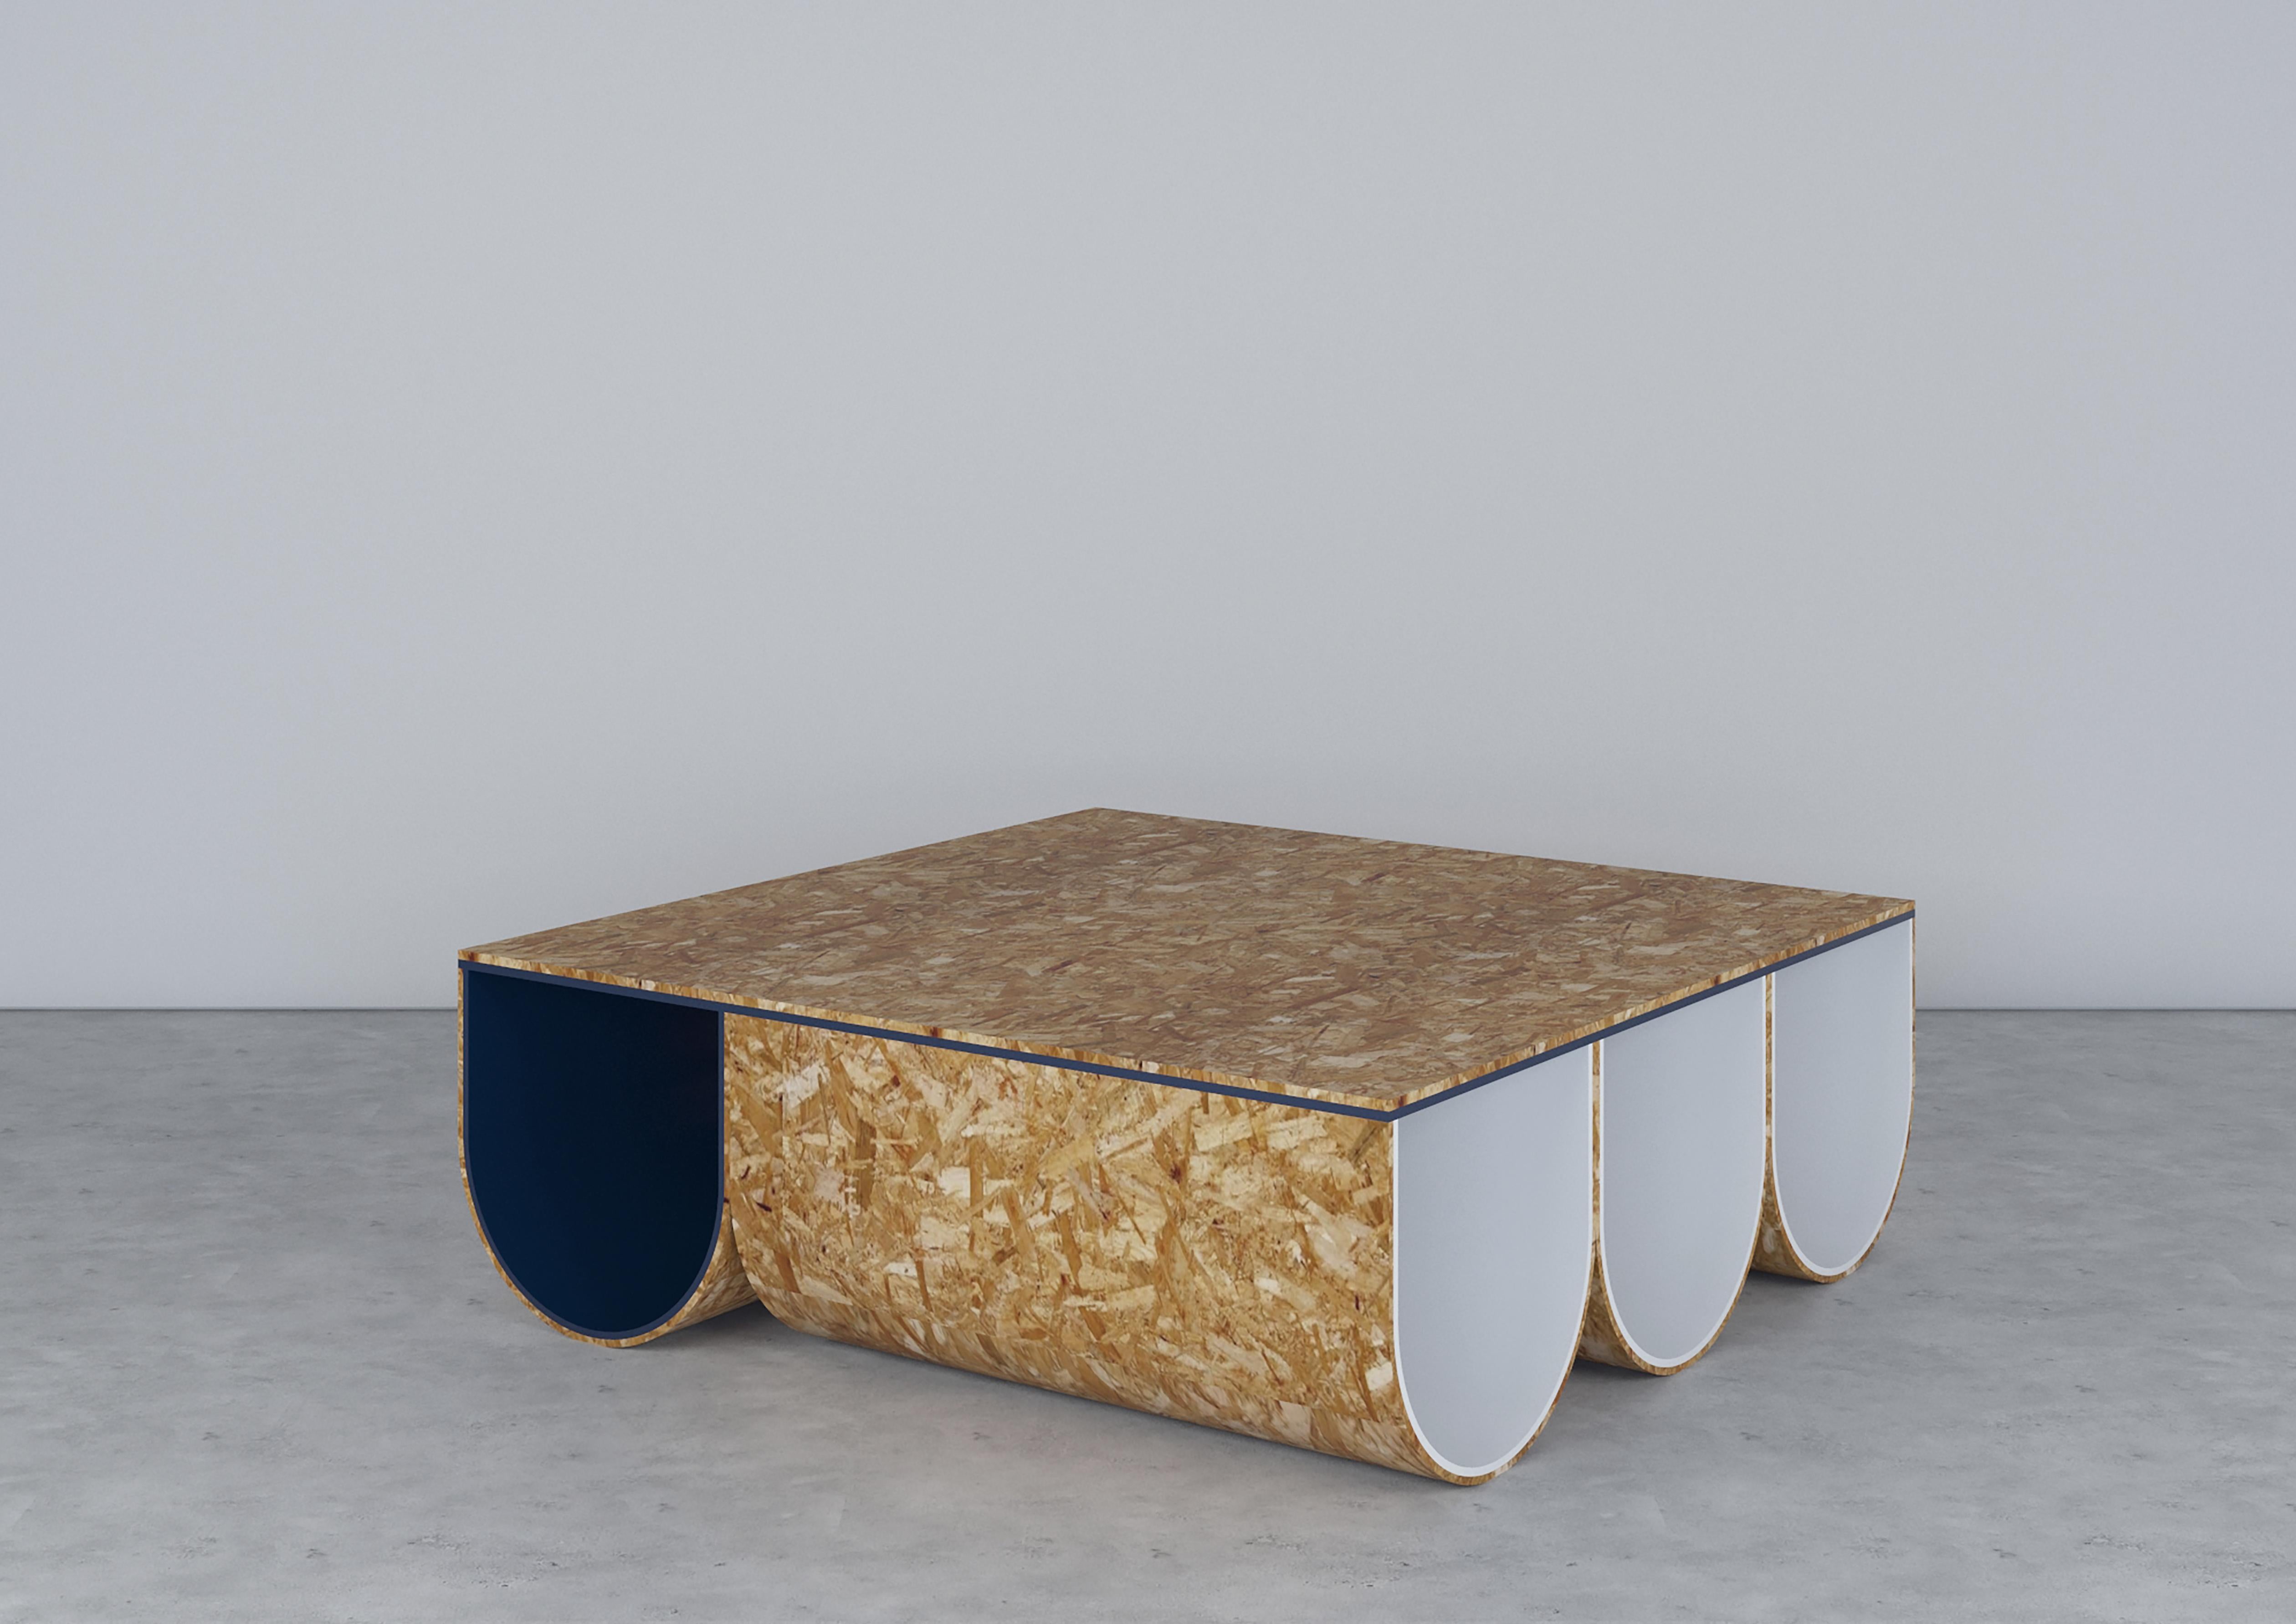 Hygge coffee table by Shou
Dimensions: W 120 x D 120 x H 40 cm
Materials: OSB and MDF laquered painting.

Hygge Coffee Table was designed with inspiration from the Scandinavian philosophy of 'hygge'. It aims to give the space a warm and cozy